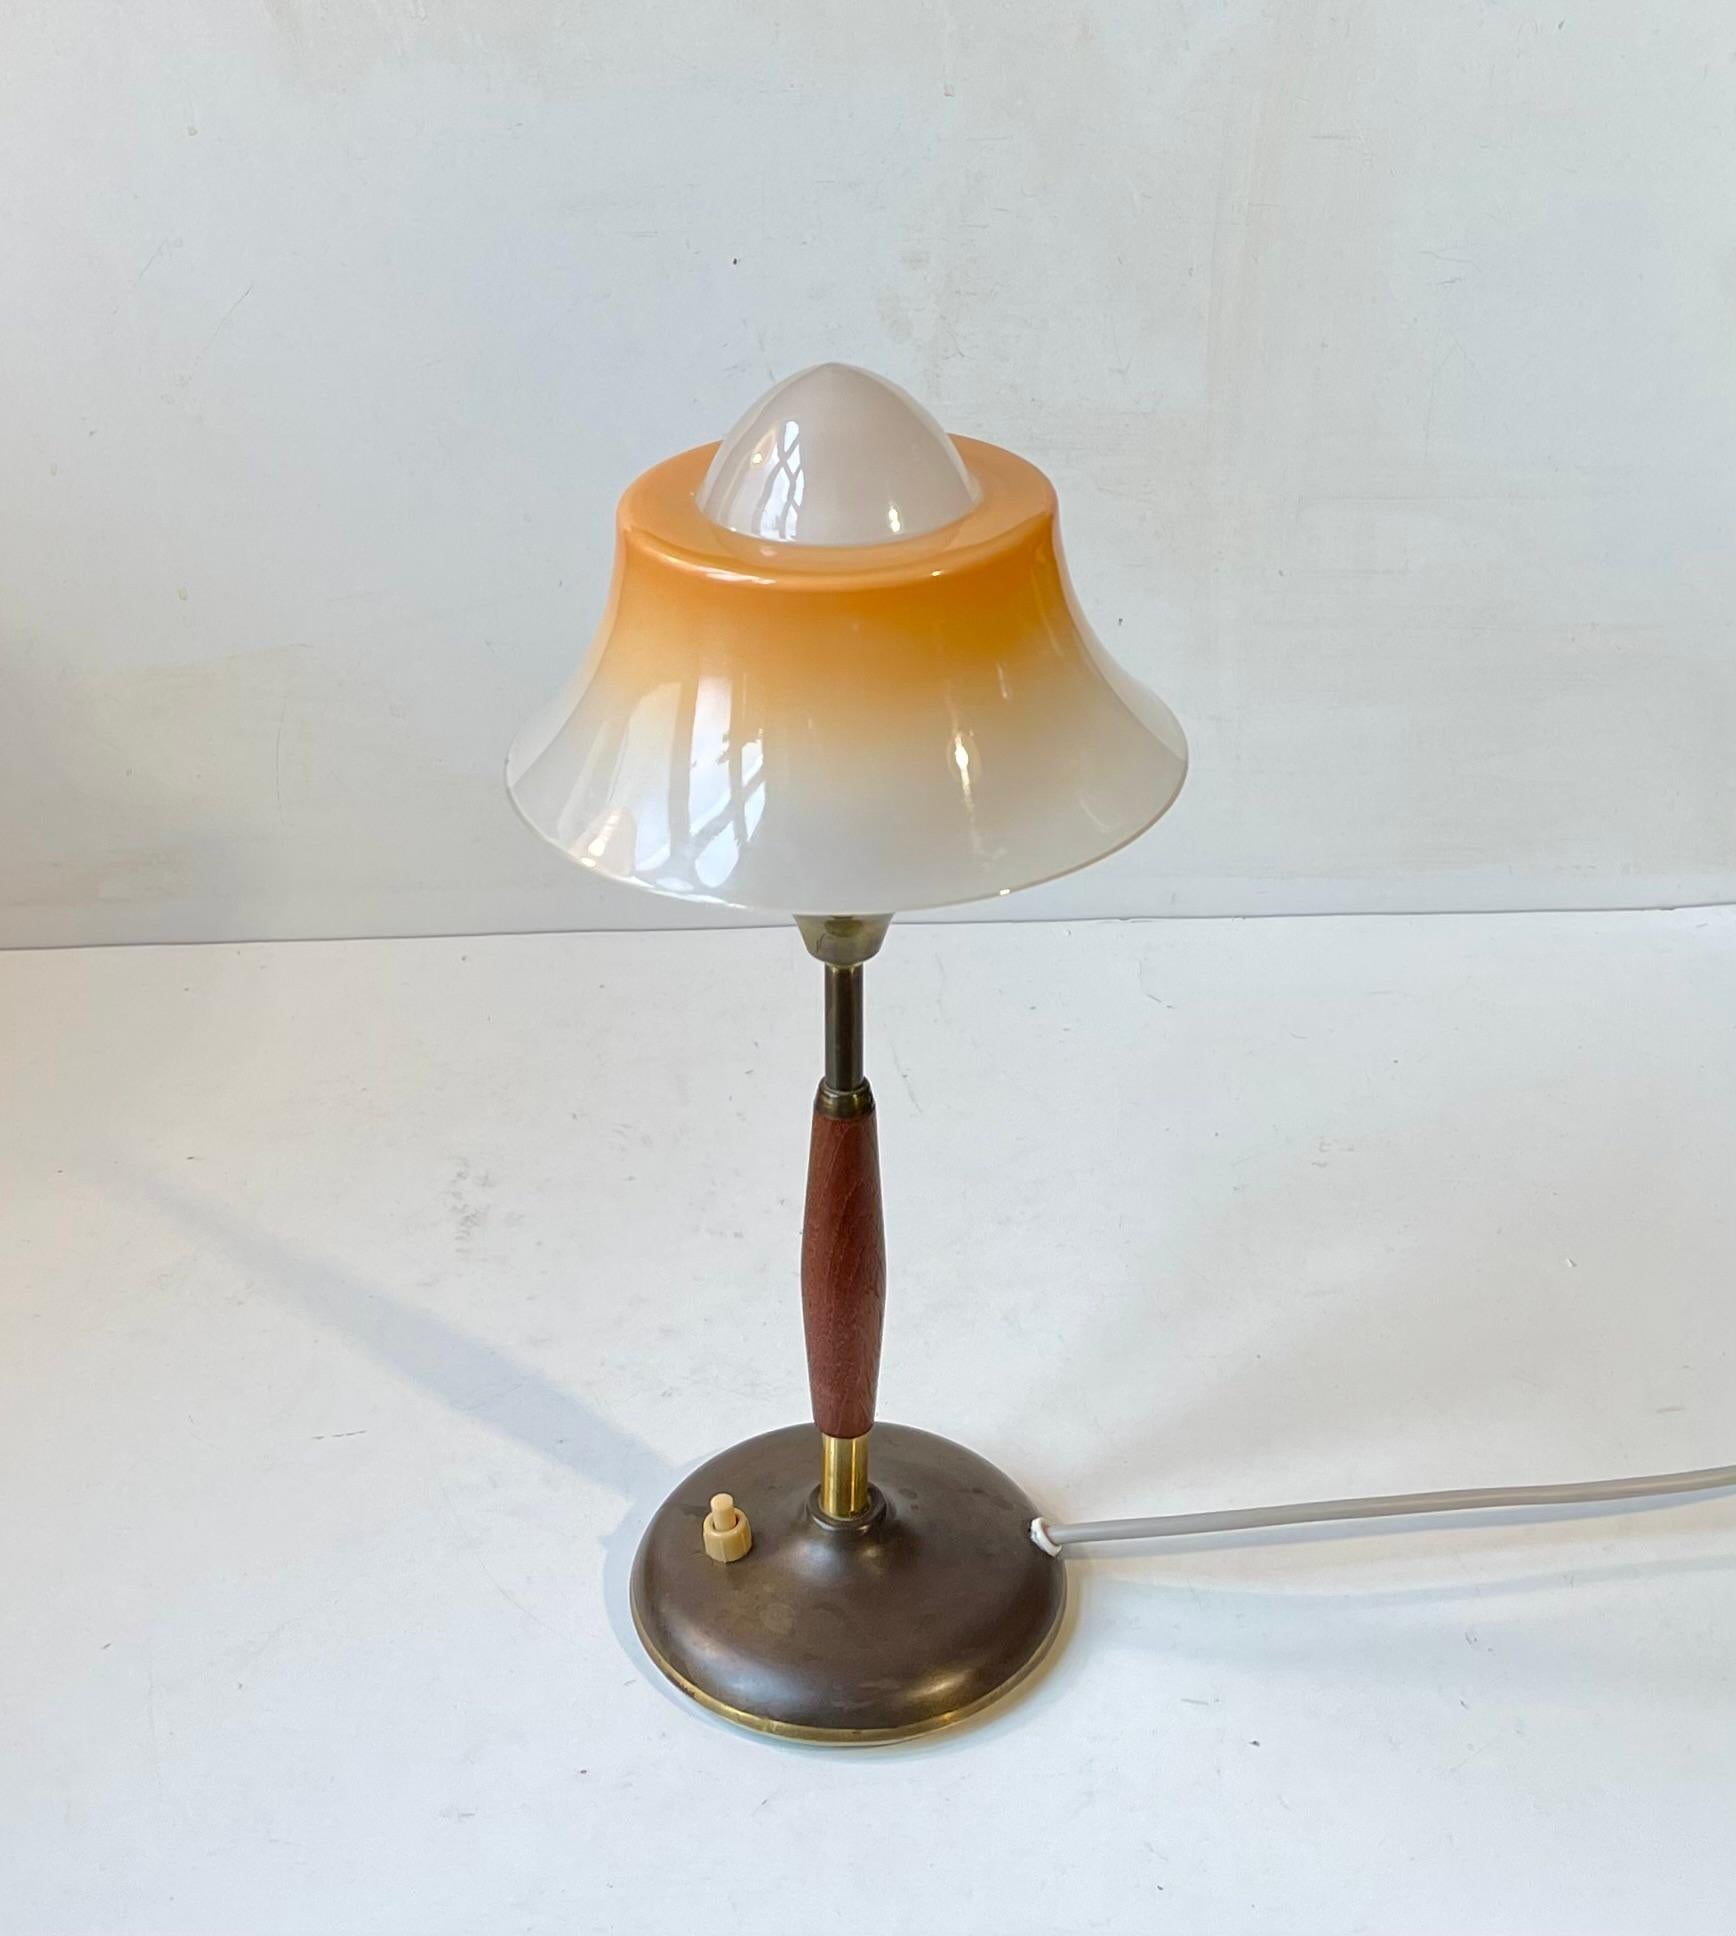 Danish Art Deco styled desk lamp designed by Fog and Mørup during the 1930s. It features a brass base and rod set with solid teak. The iconic single layered, partially painted vaseline glass top shade resembles a fried egg - hence its name. This